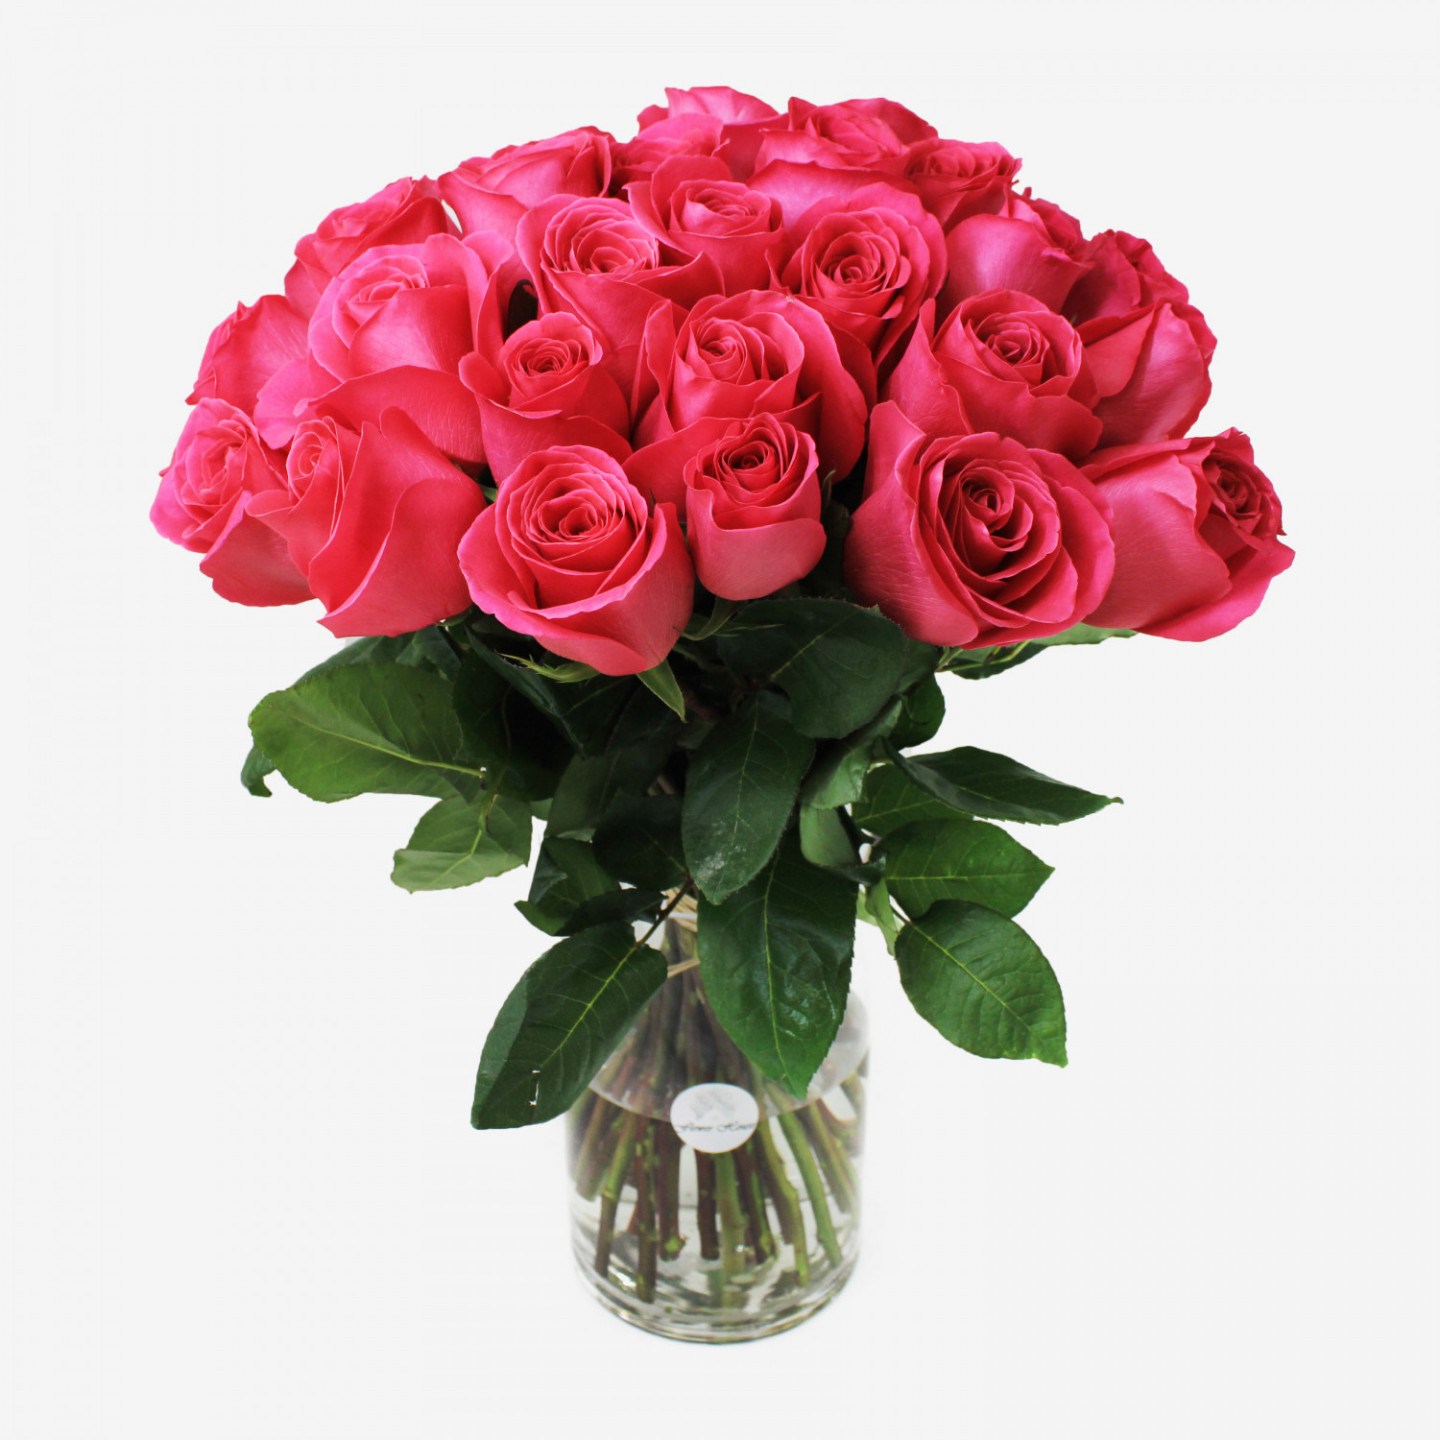 30 Pink Floyd Roses Bouquet